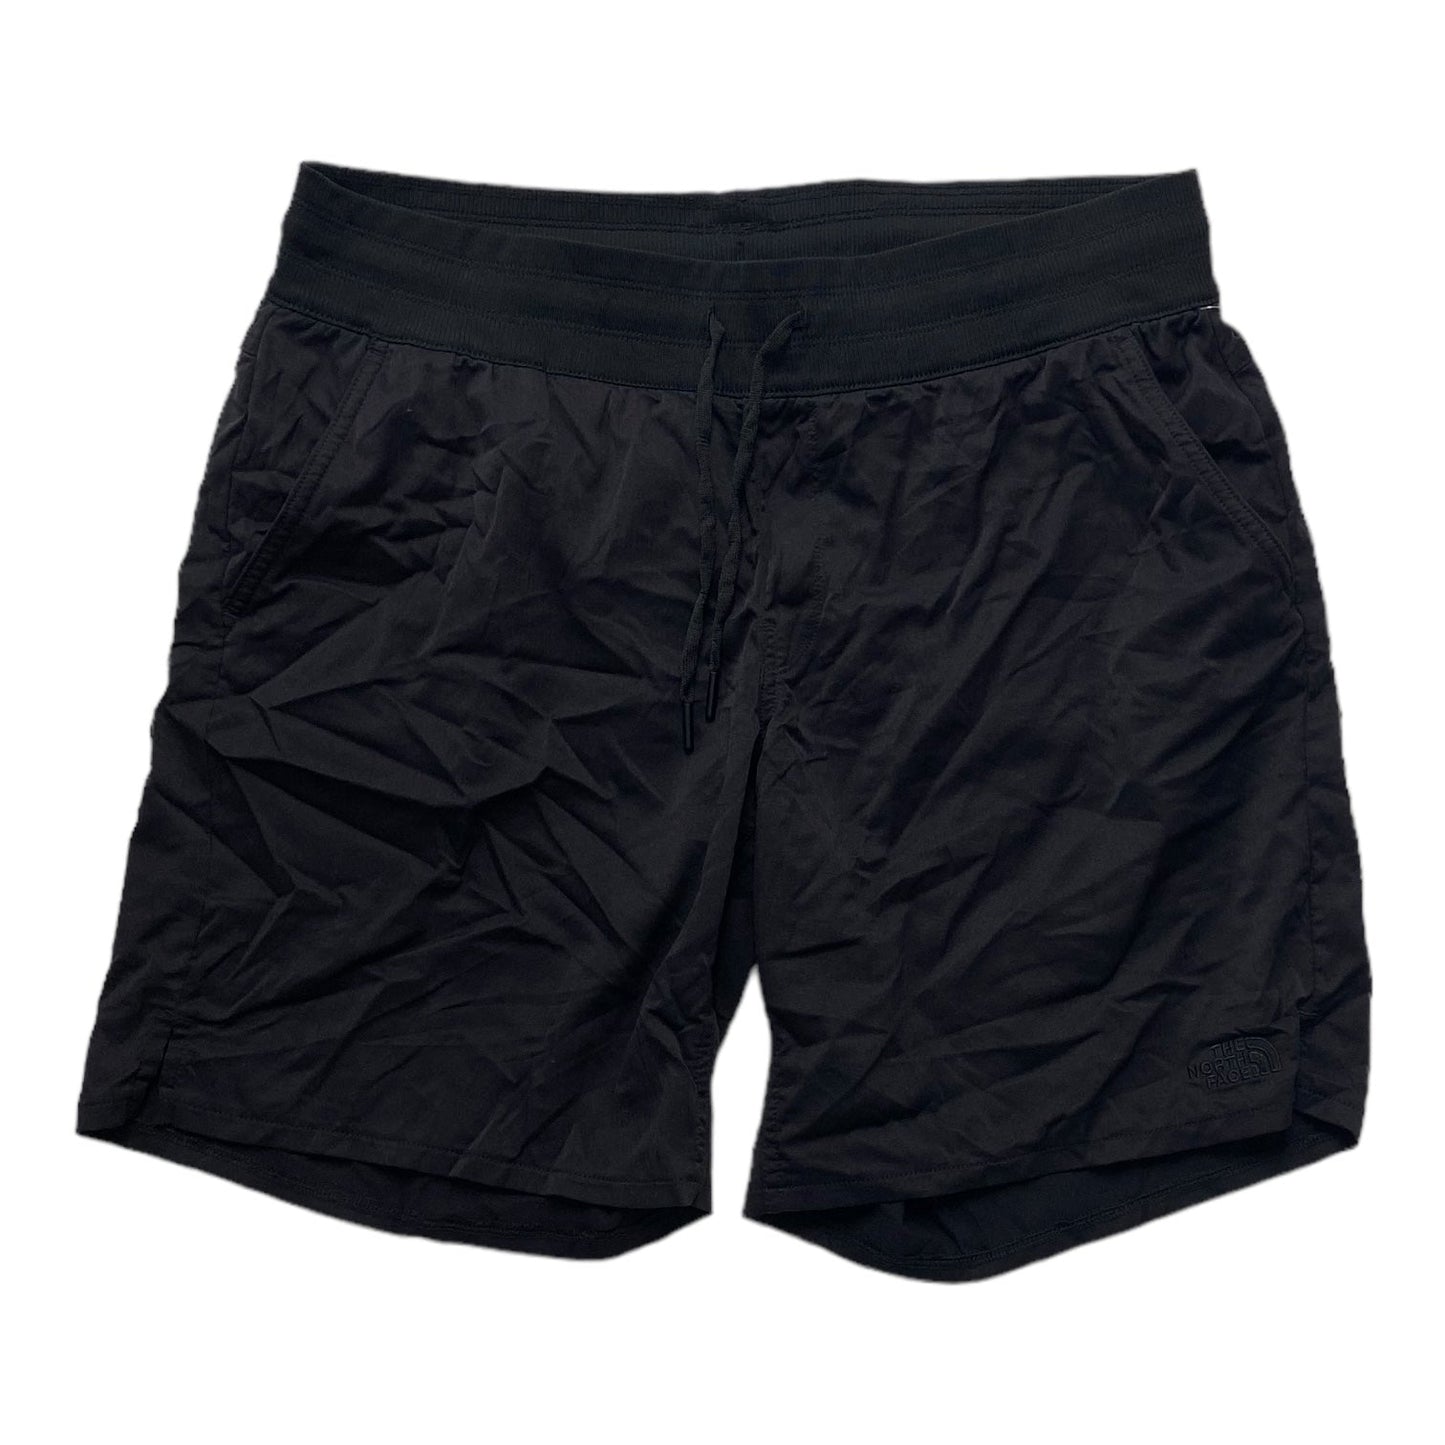 Black Athletic Shorts The North Face, Size L